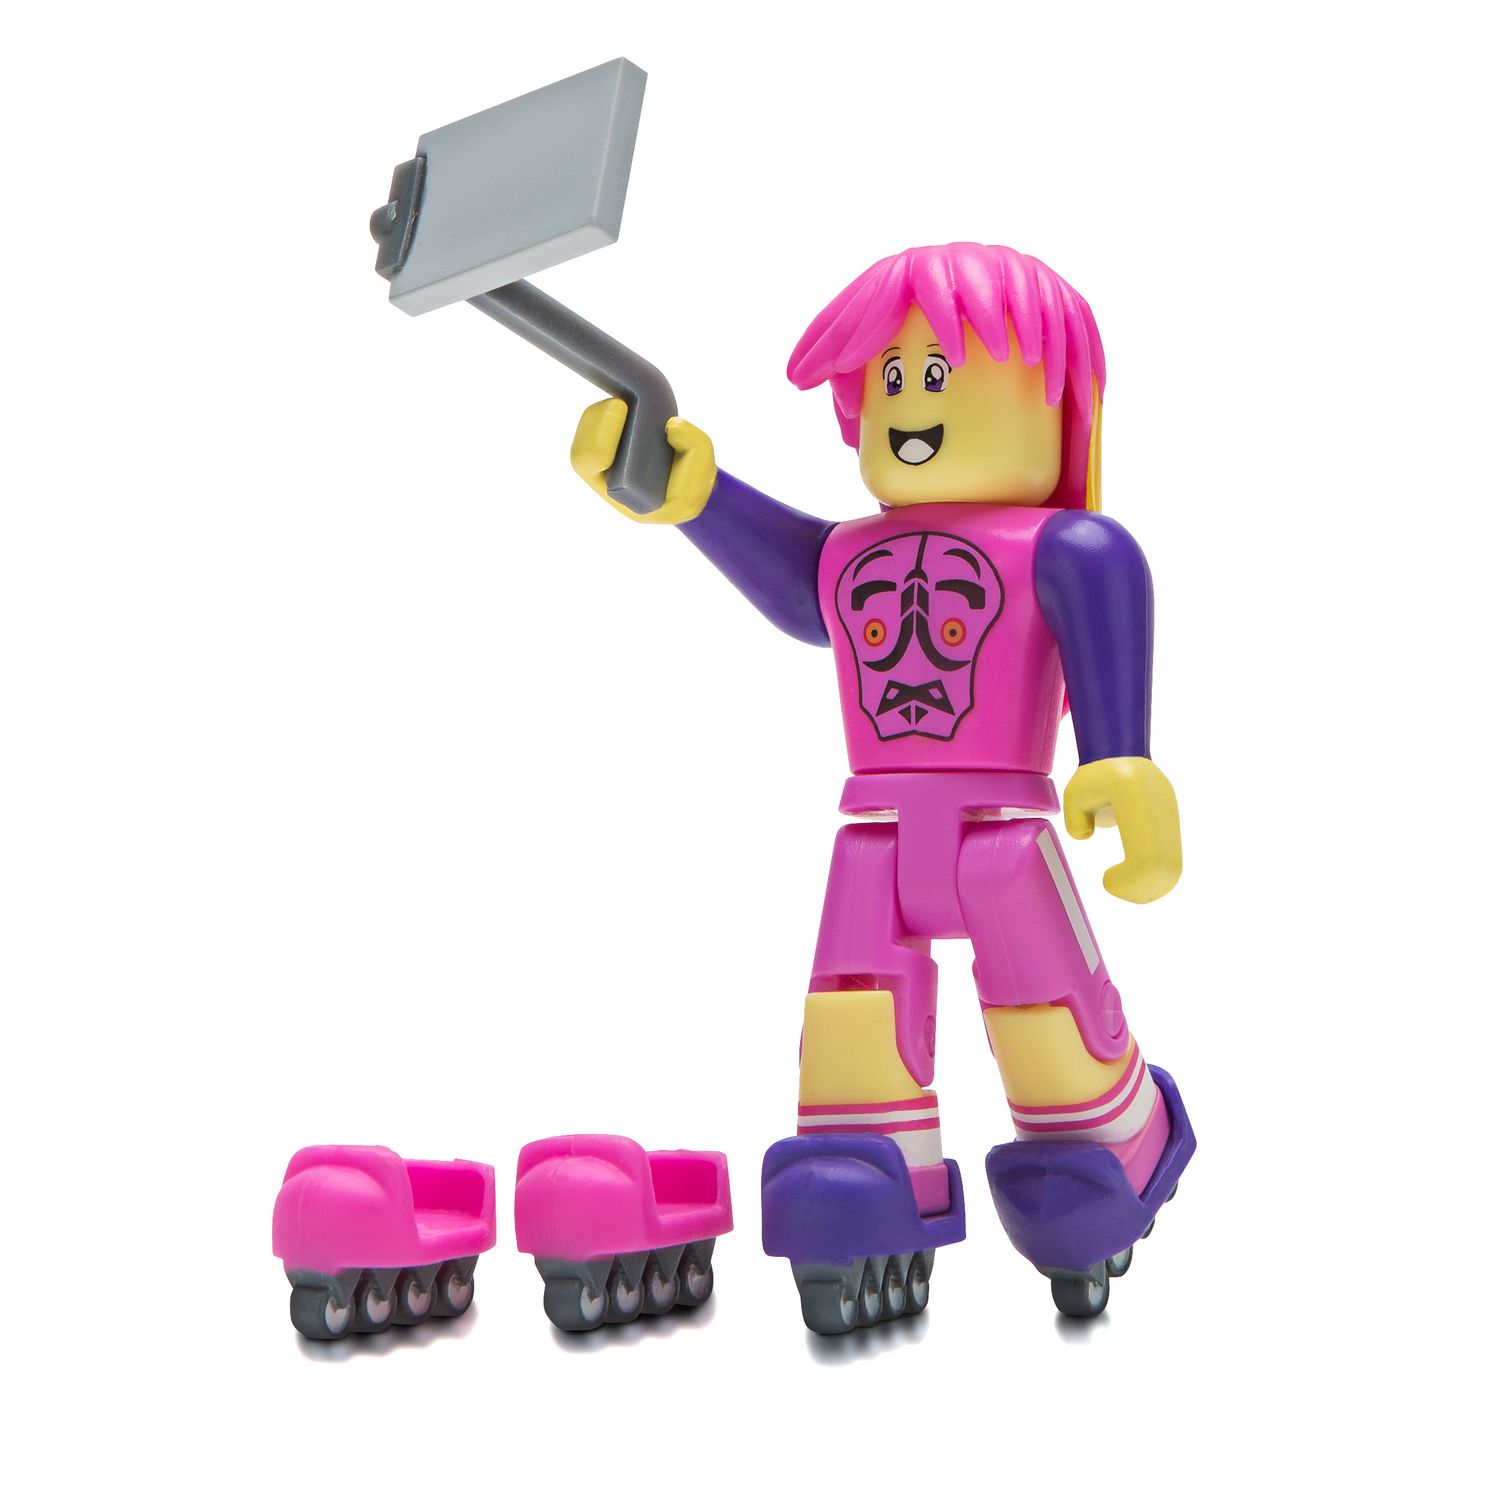 Roblox Celebrity Skating Rink Core Figure - 